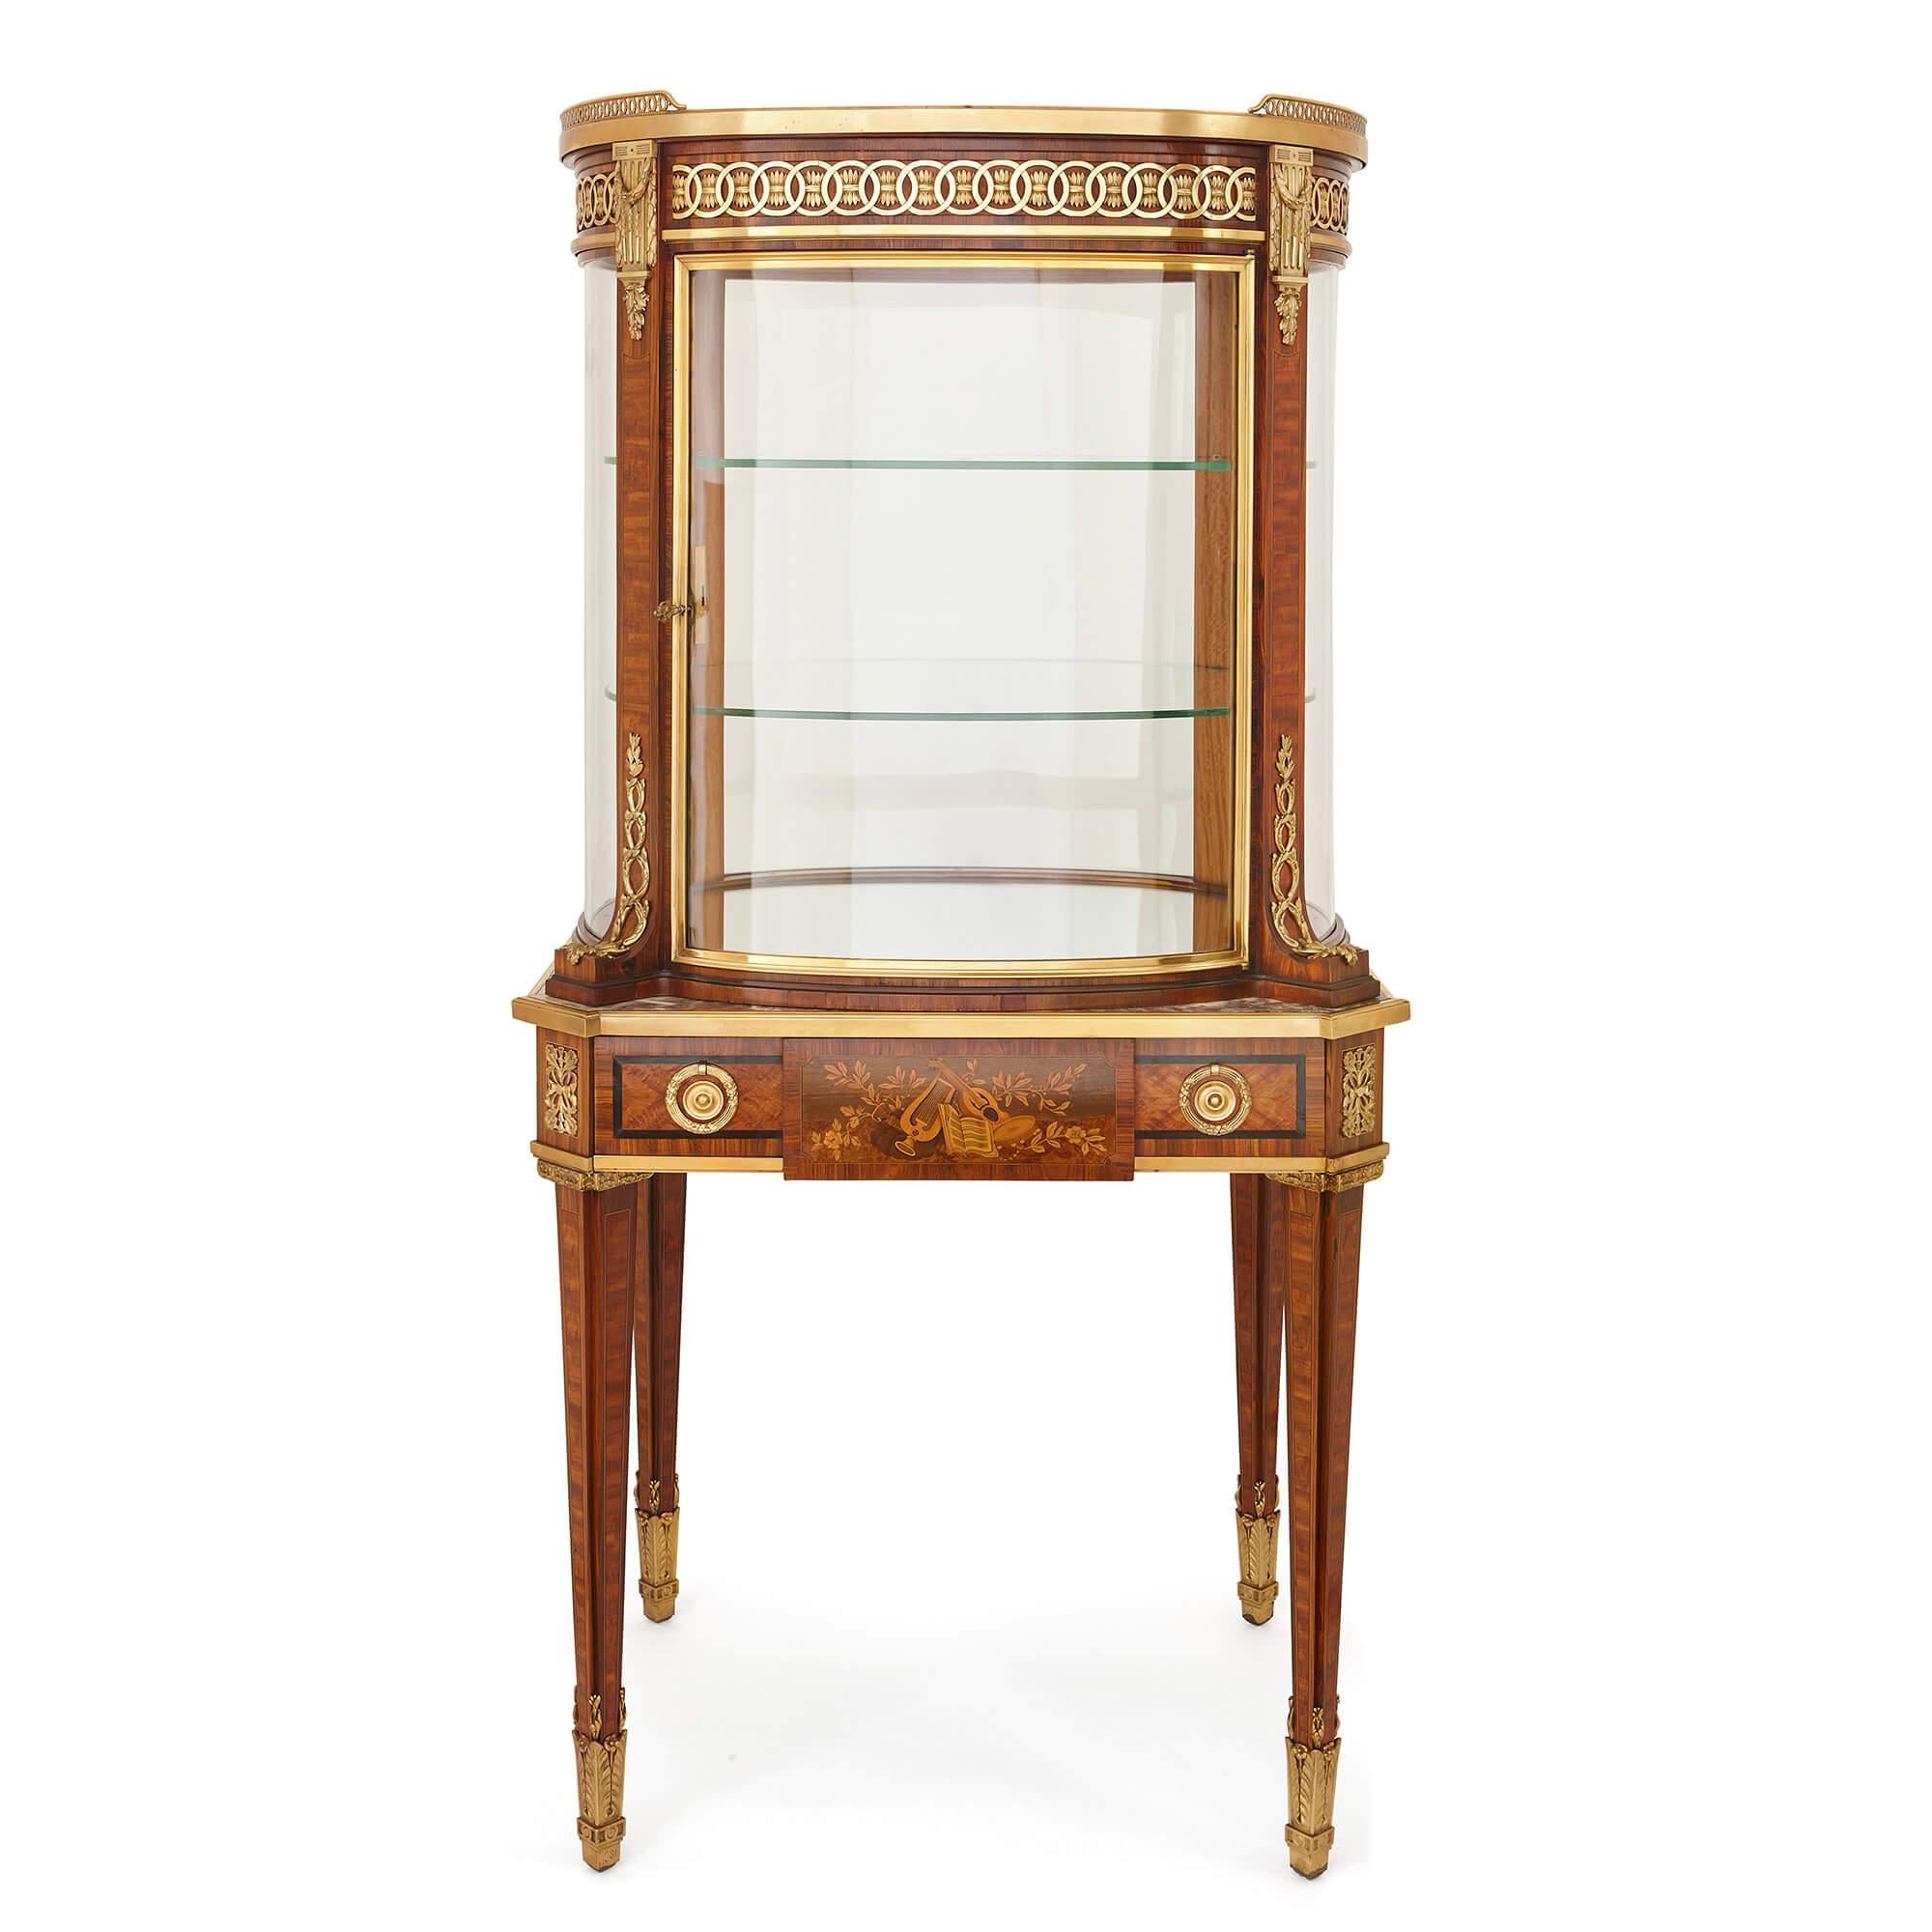 This stunning display cabinet-on-table is not a piece to hide in a corner of a room, but one to place firmly in the centre, thanks to its sophisticated, elegantly-curved design with glass on all sides of the piece, allowing it and its contents to be